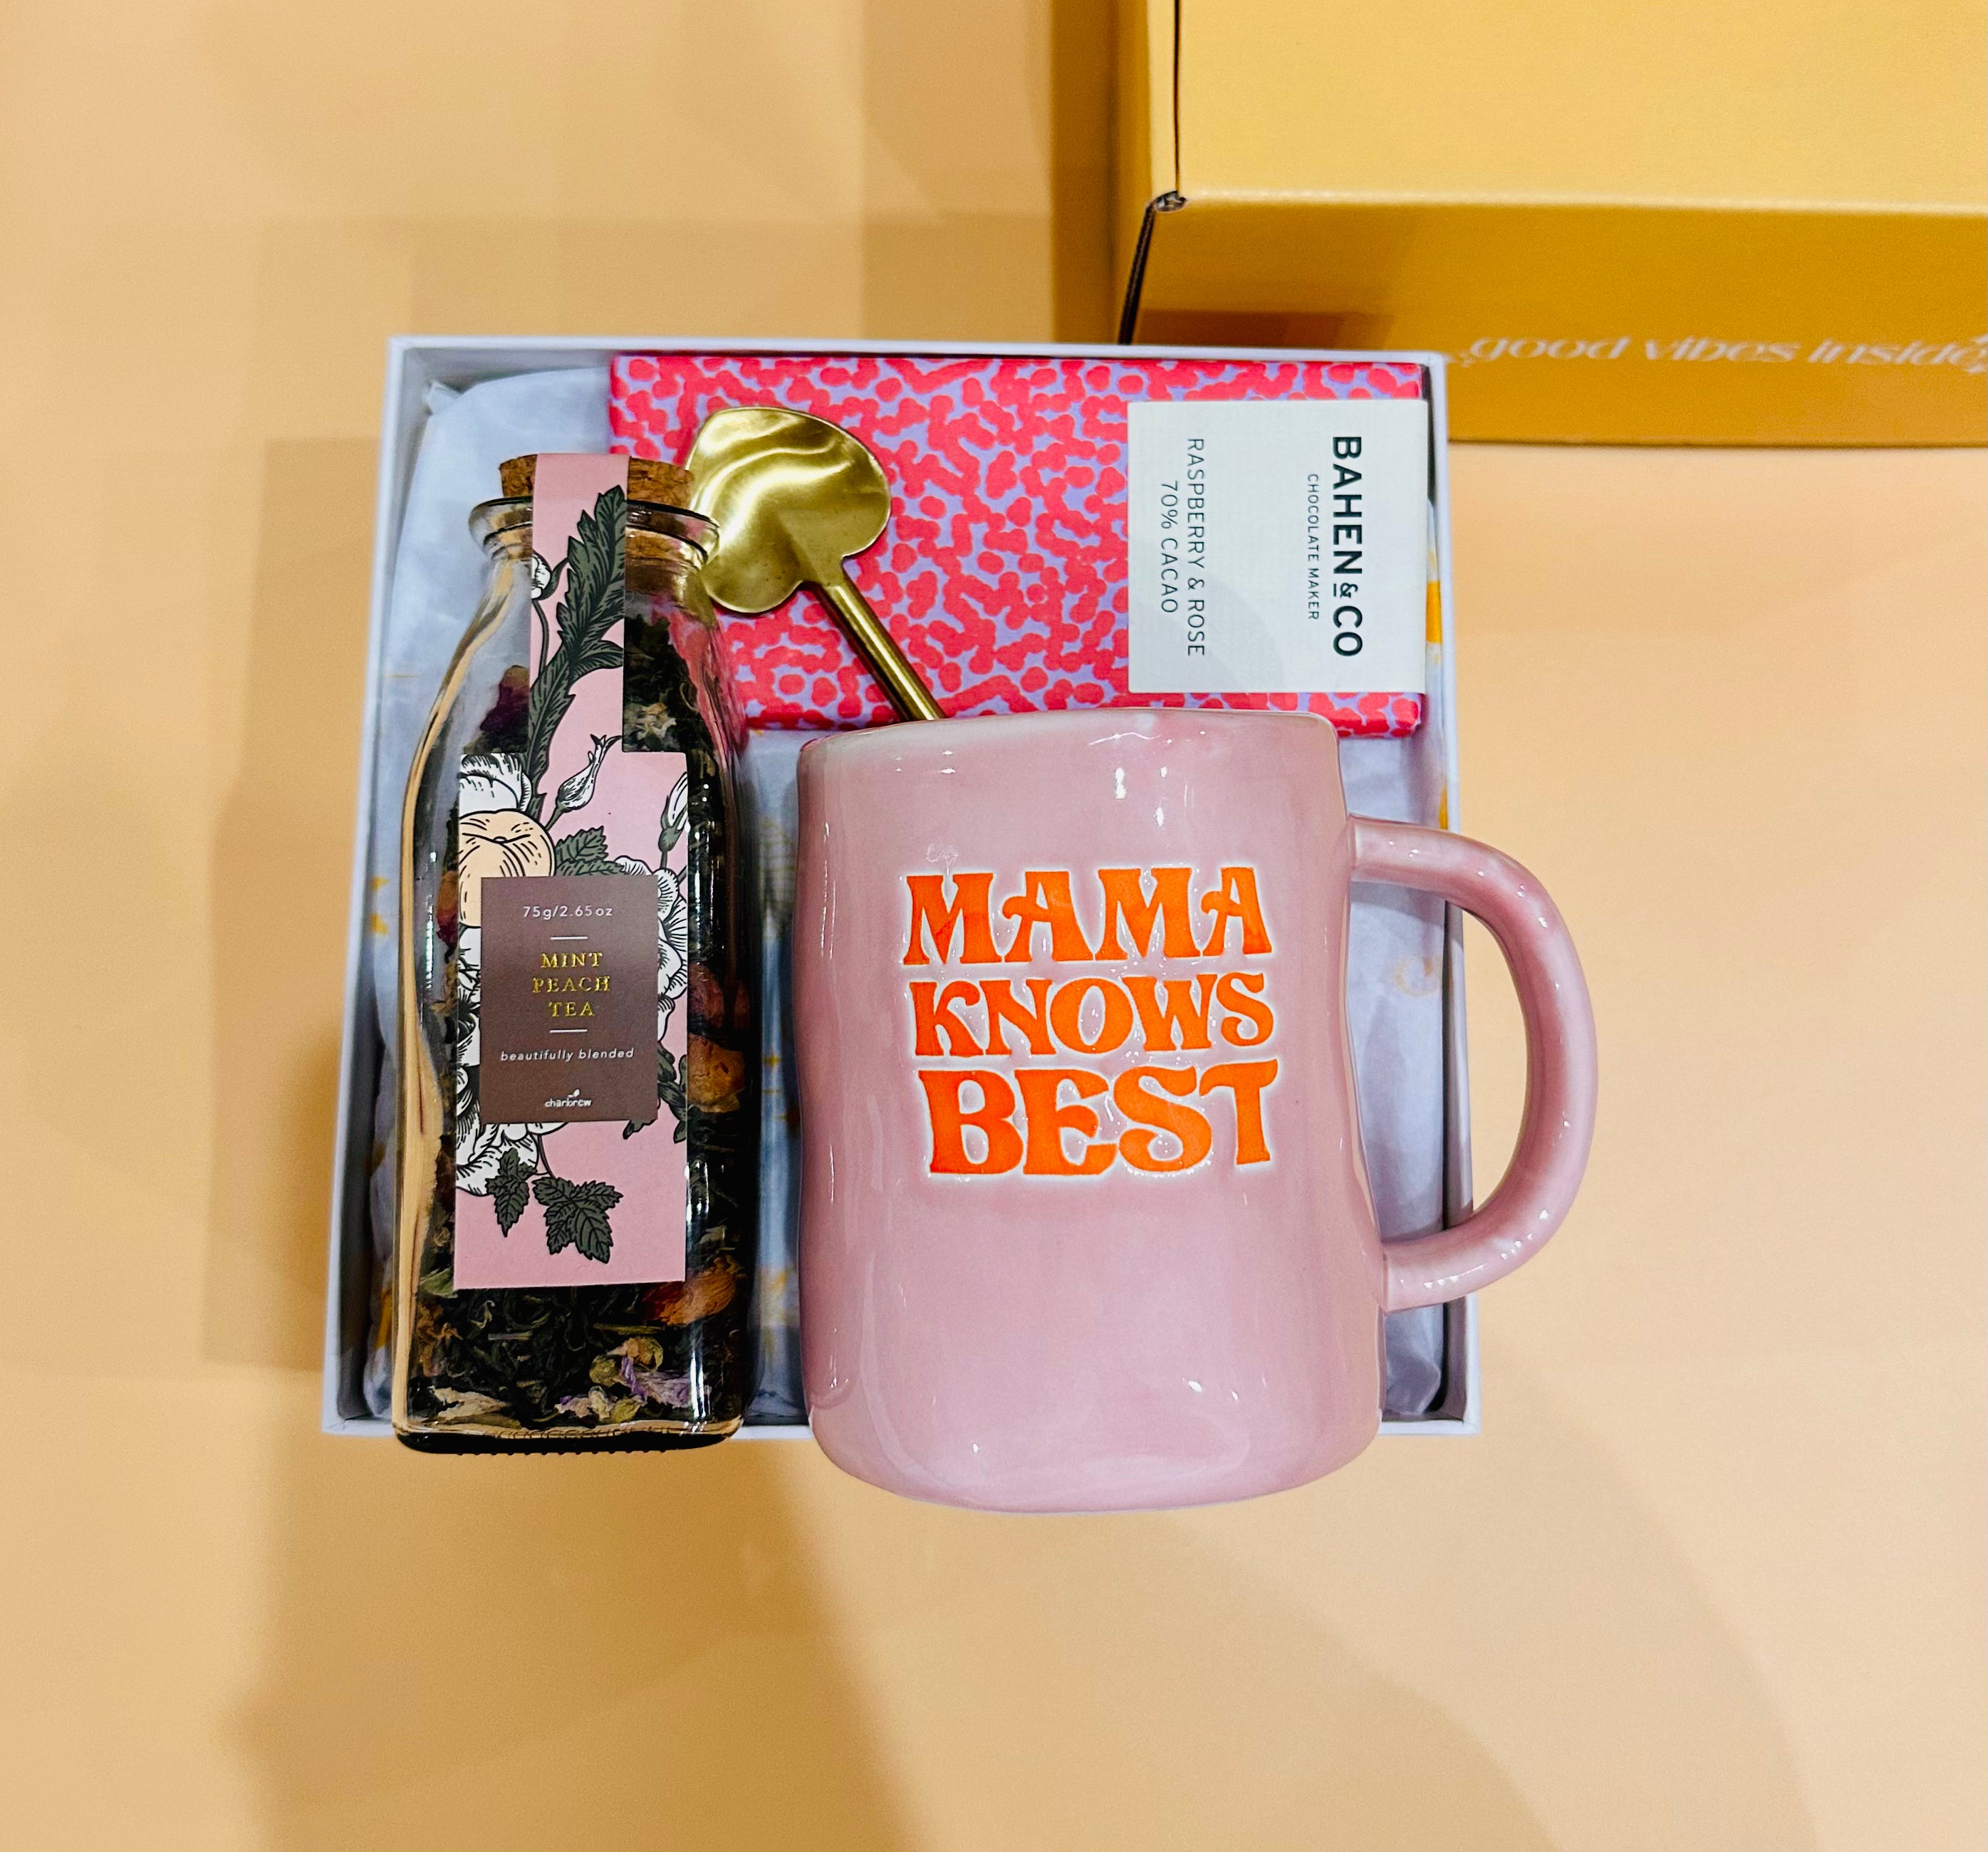 Large Mug with the words 'Mama knows best'  A Bahen and Co Raspberry flavour chocolate bar. A heart shaped gold spoon and some mint peach tea in a glass jar.